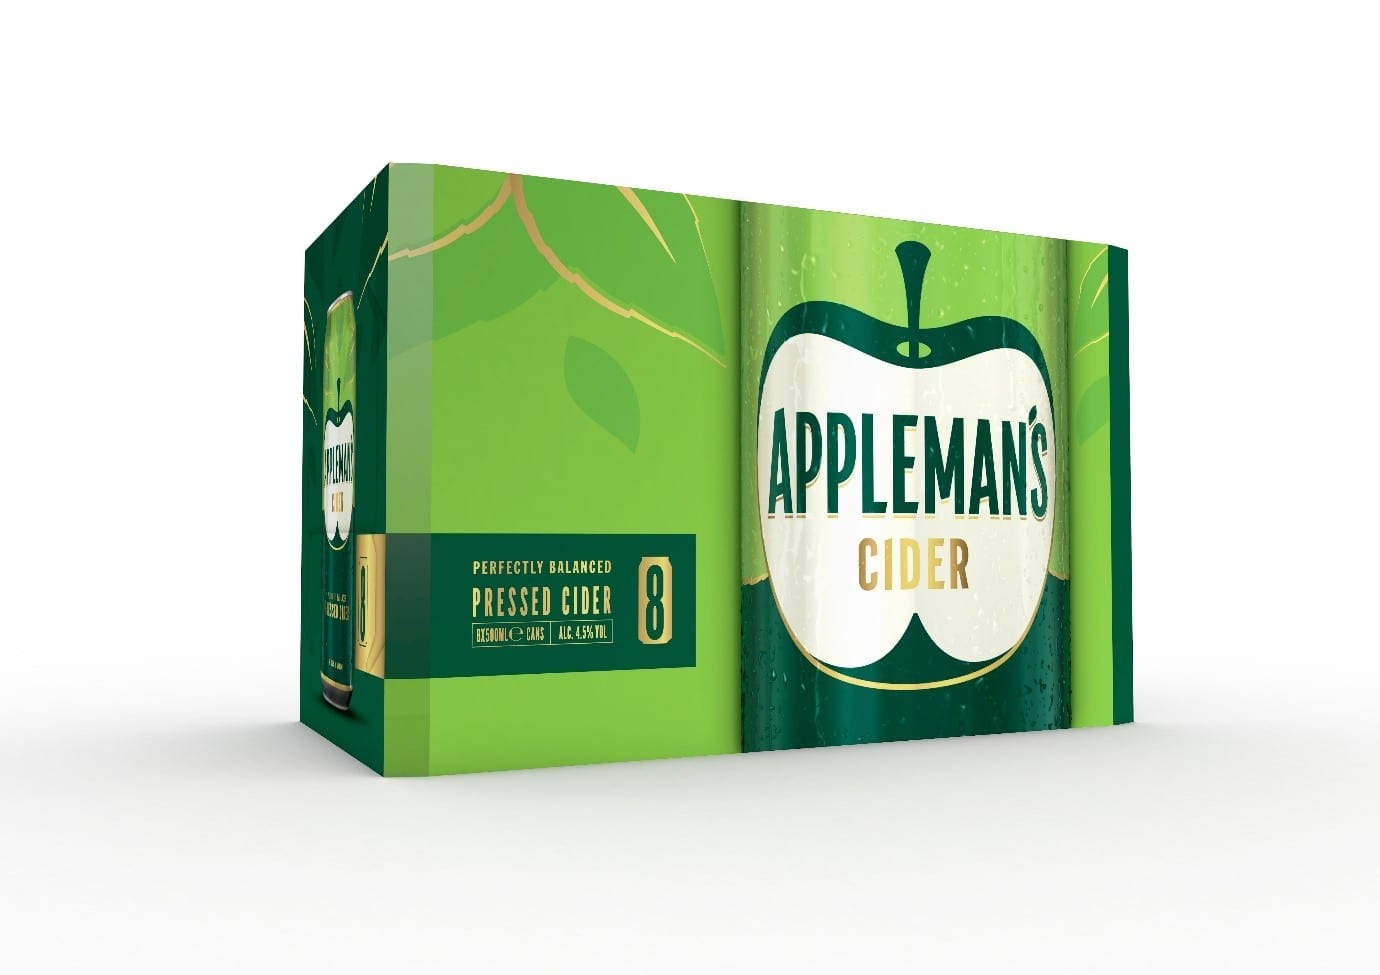 With an ABV of 4.5%, Appleman’s is available nationwide in 500ml bottles and cans and eight-pack cans